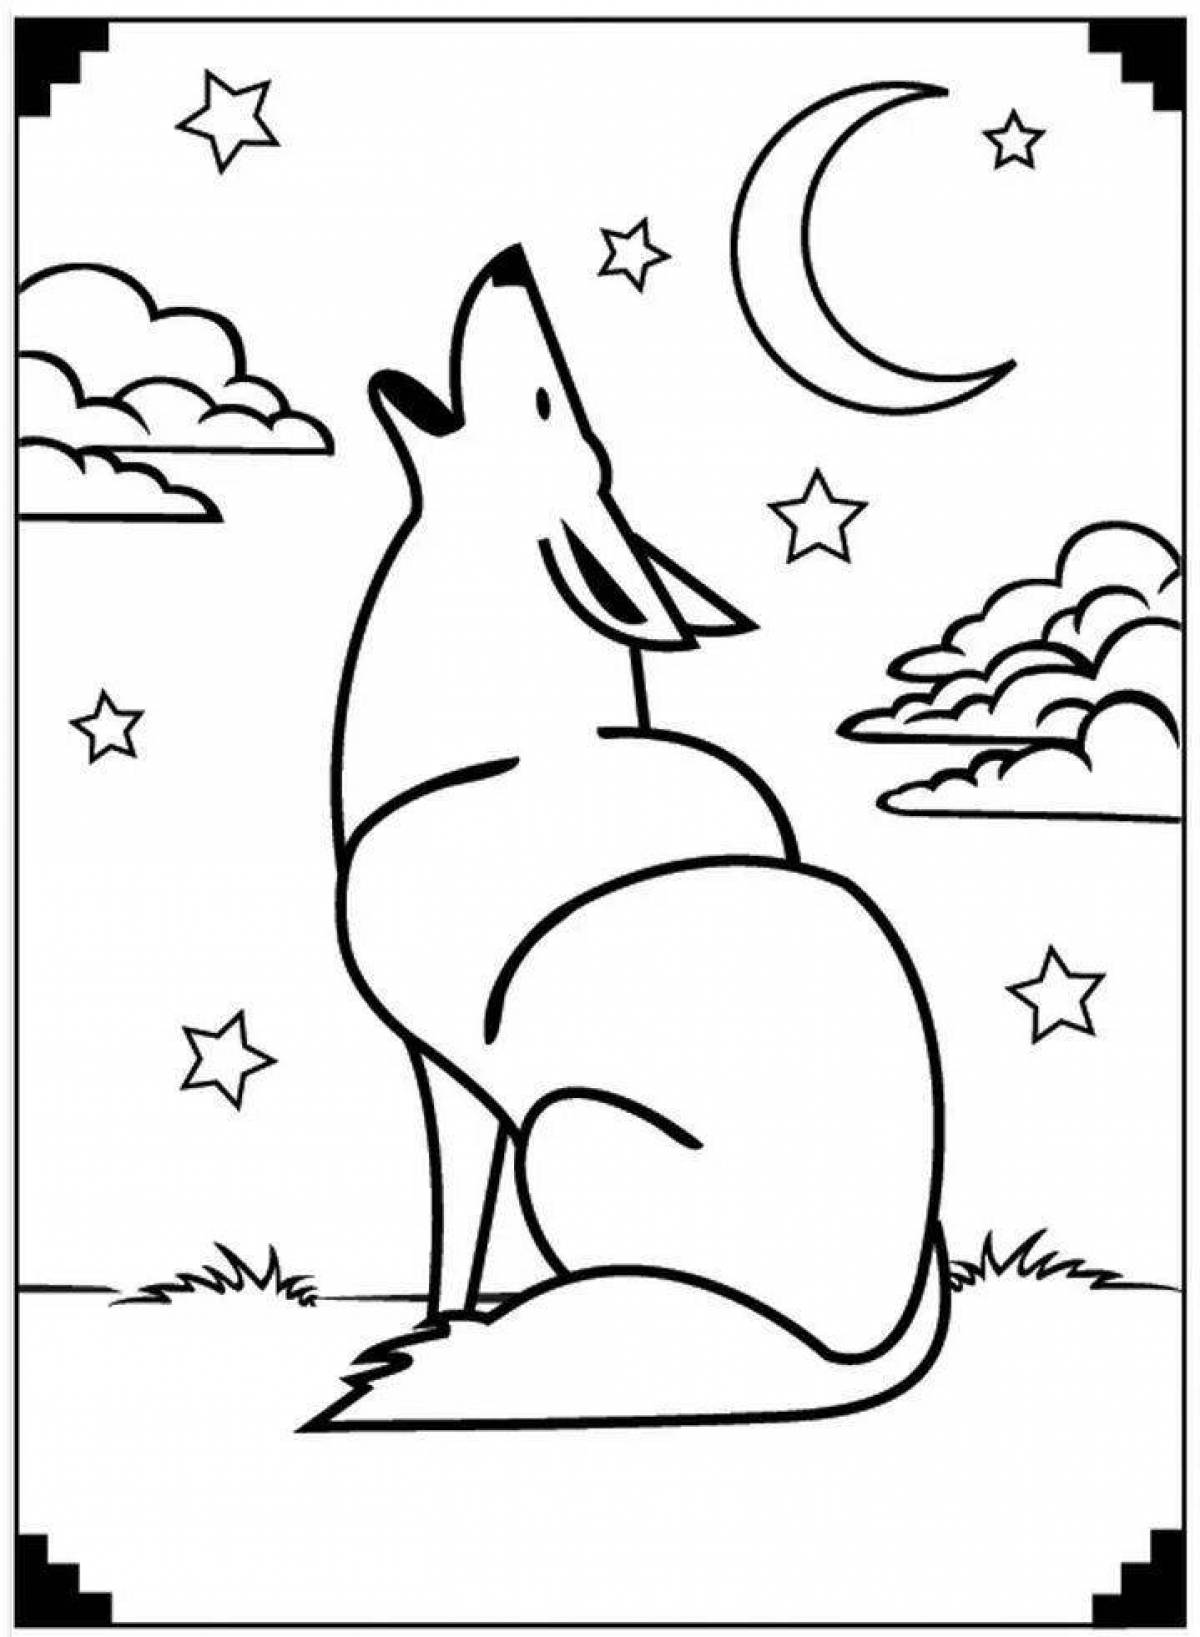 Fabulous Christmas wolf coloring book